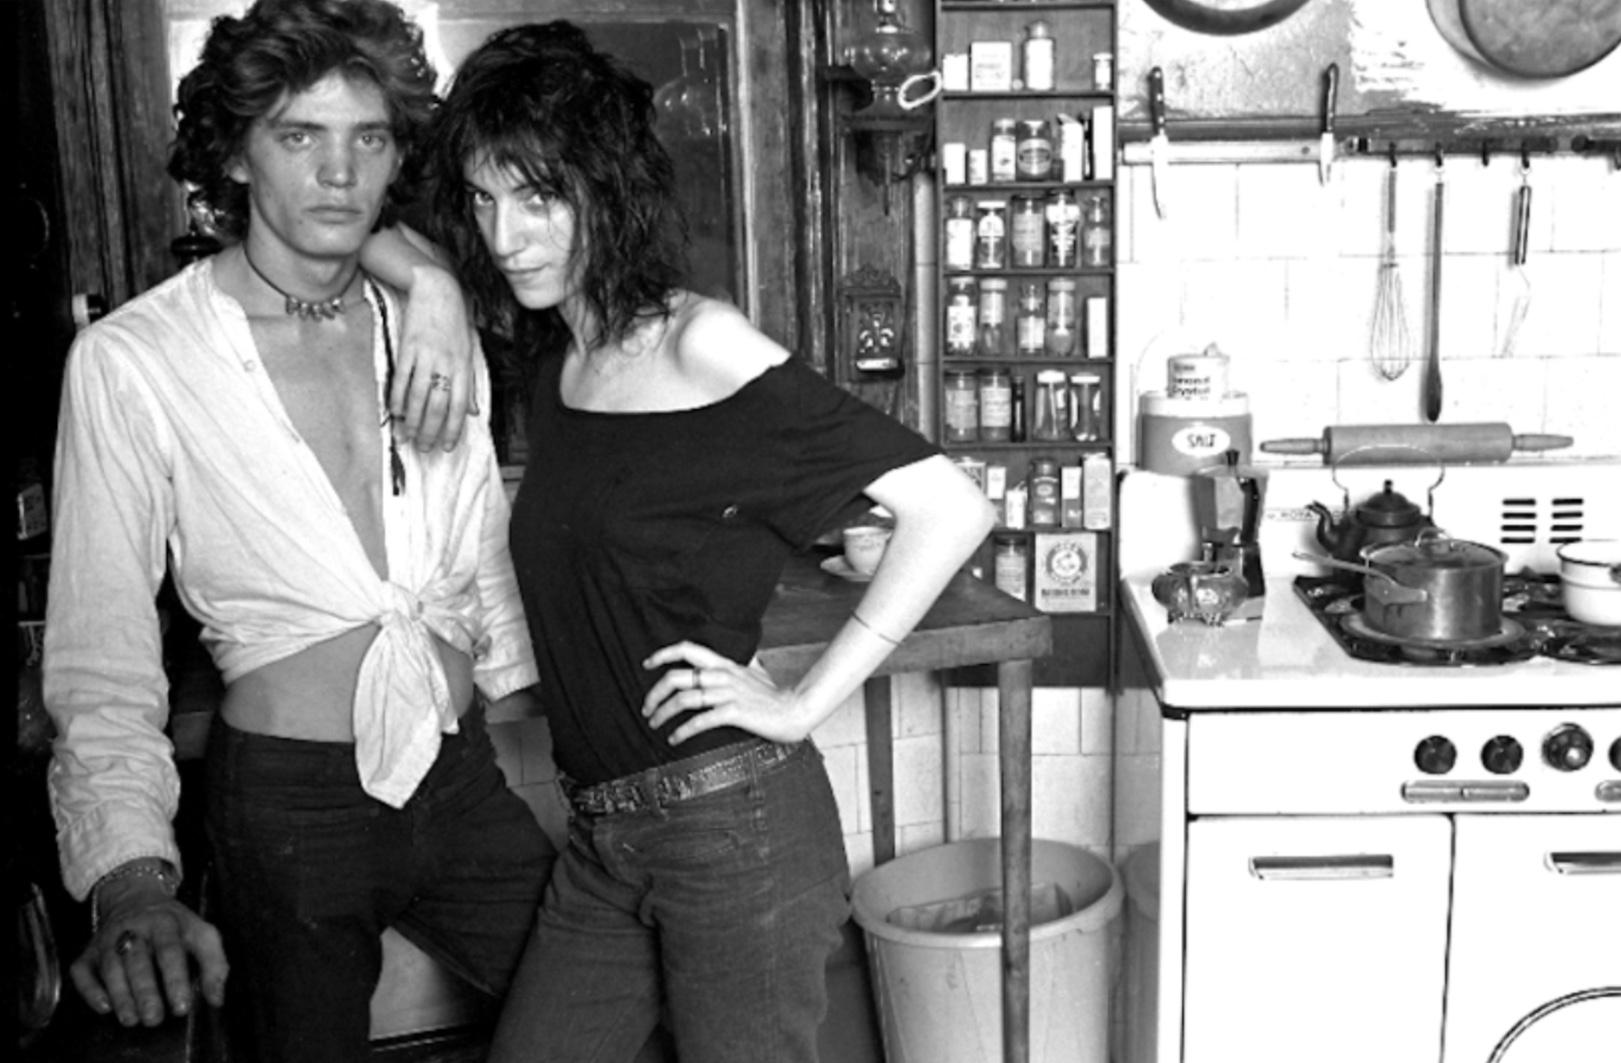 Signed limited edition fine art print of Patti Smith and Robert Mapplethorpe, taken in her kitchen in New York by celebrated photographer and filmmaker, Norman Seeff in 1969.

This Patty Smith by Norman Seeff print is available in the following